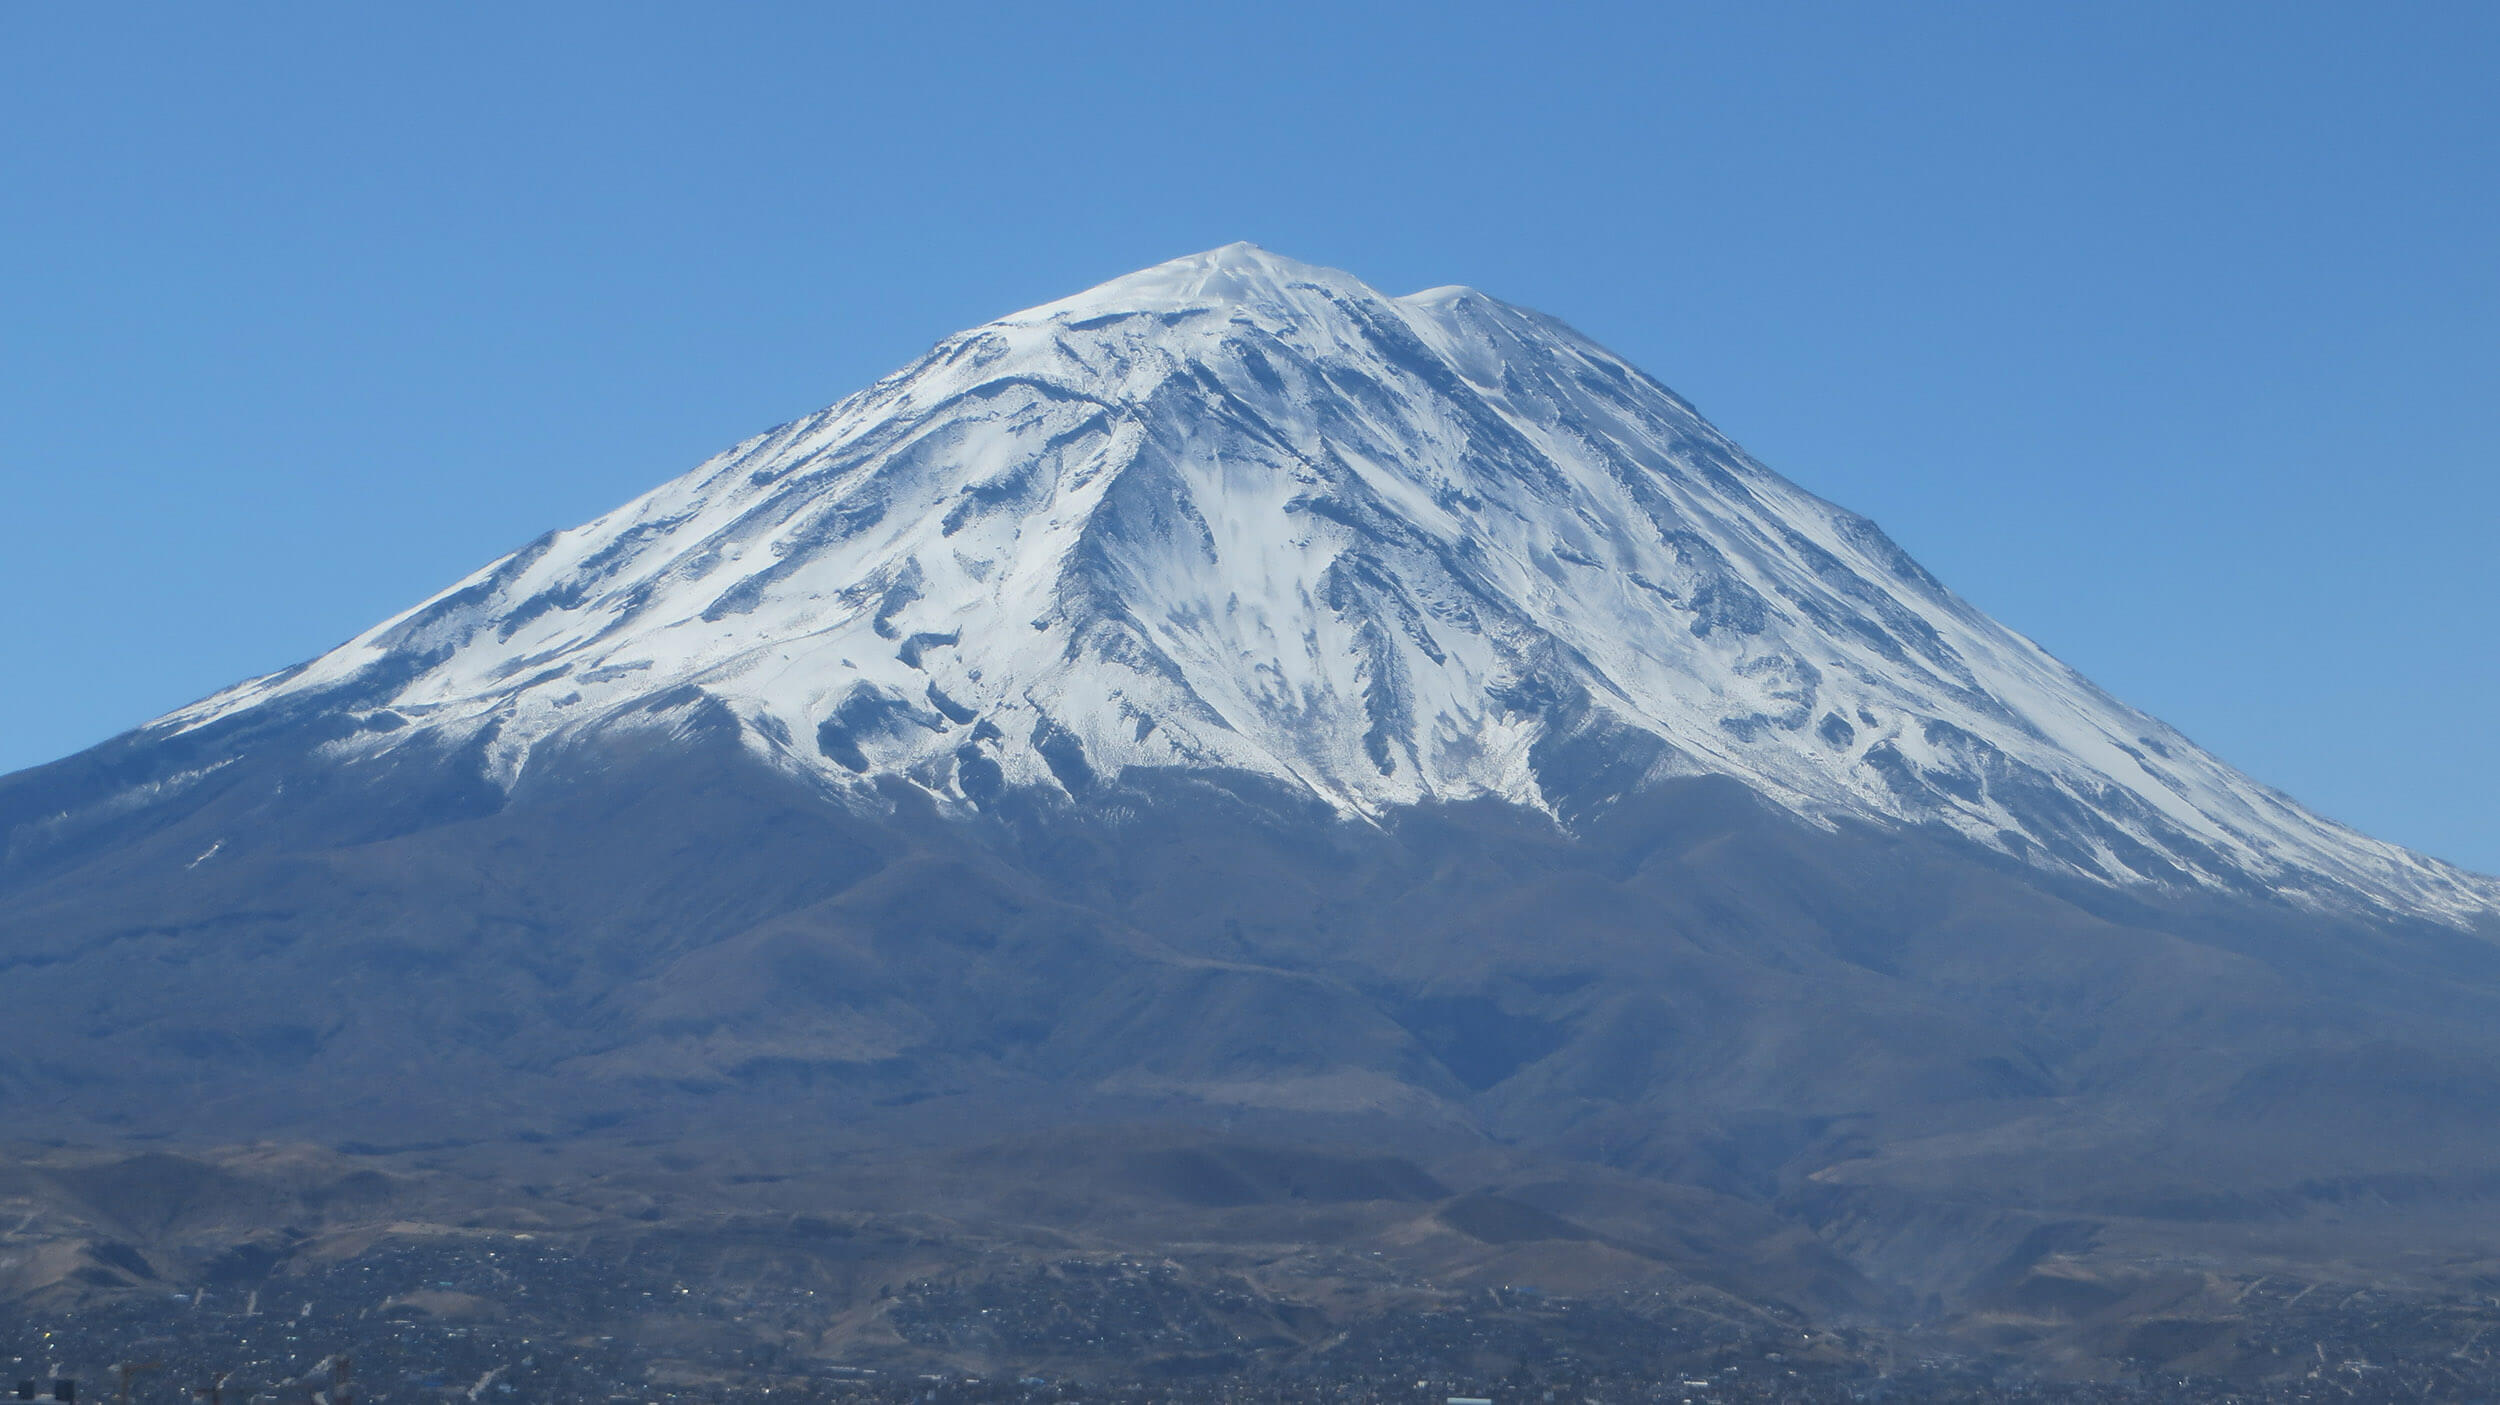 Misti Volcano is the guardian of the city